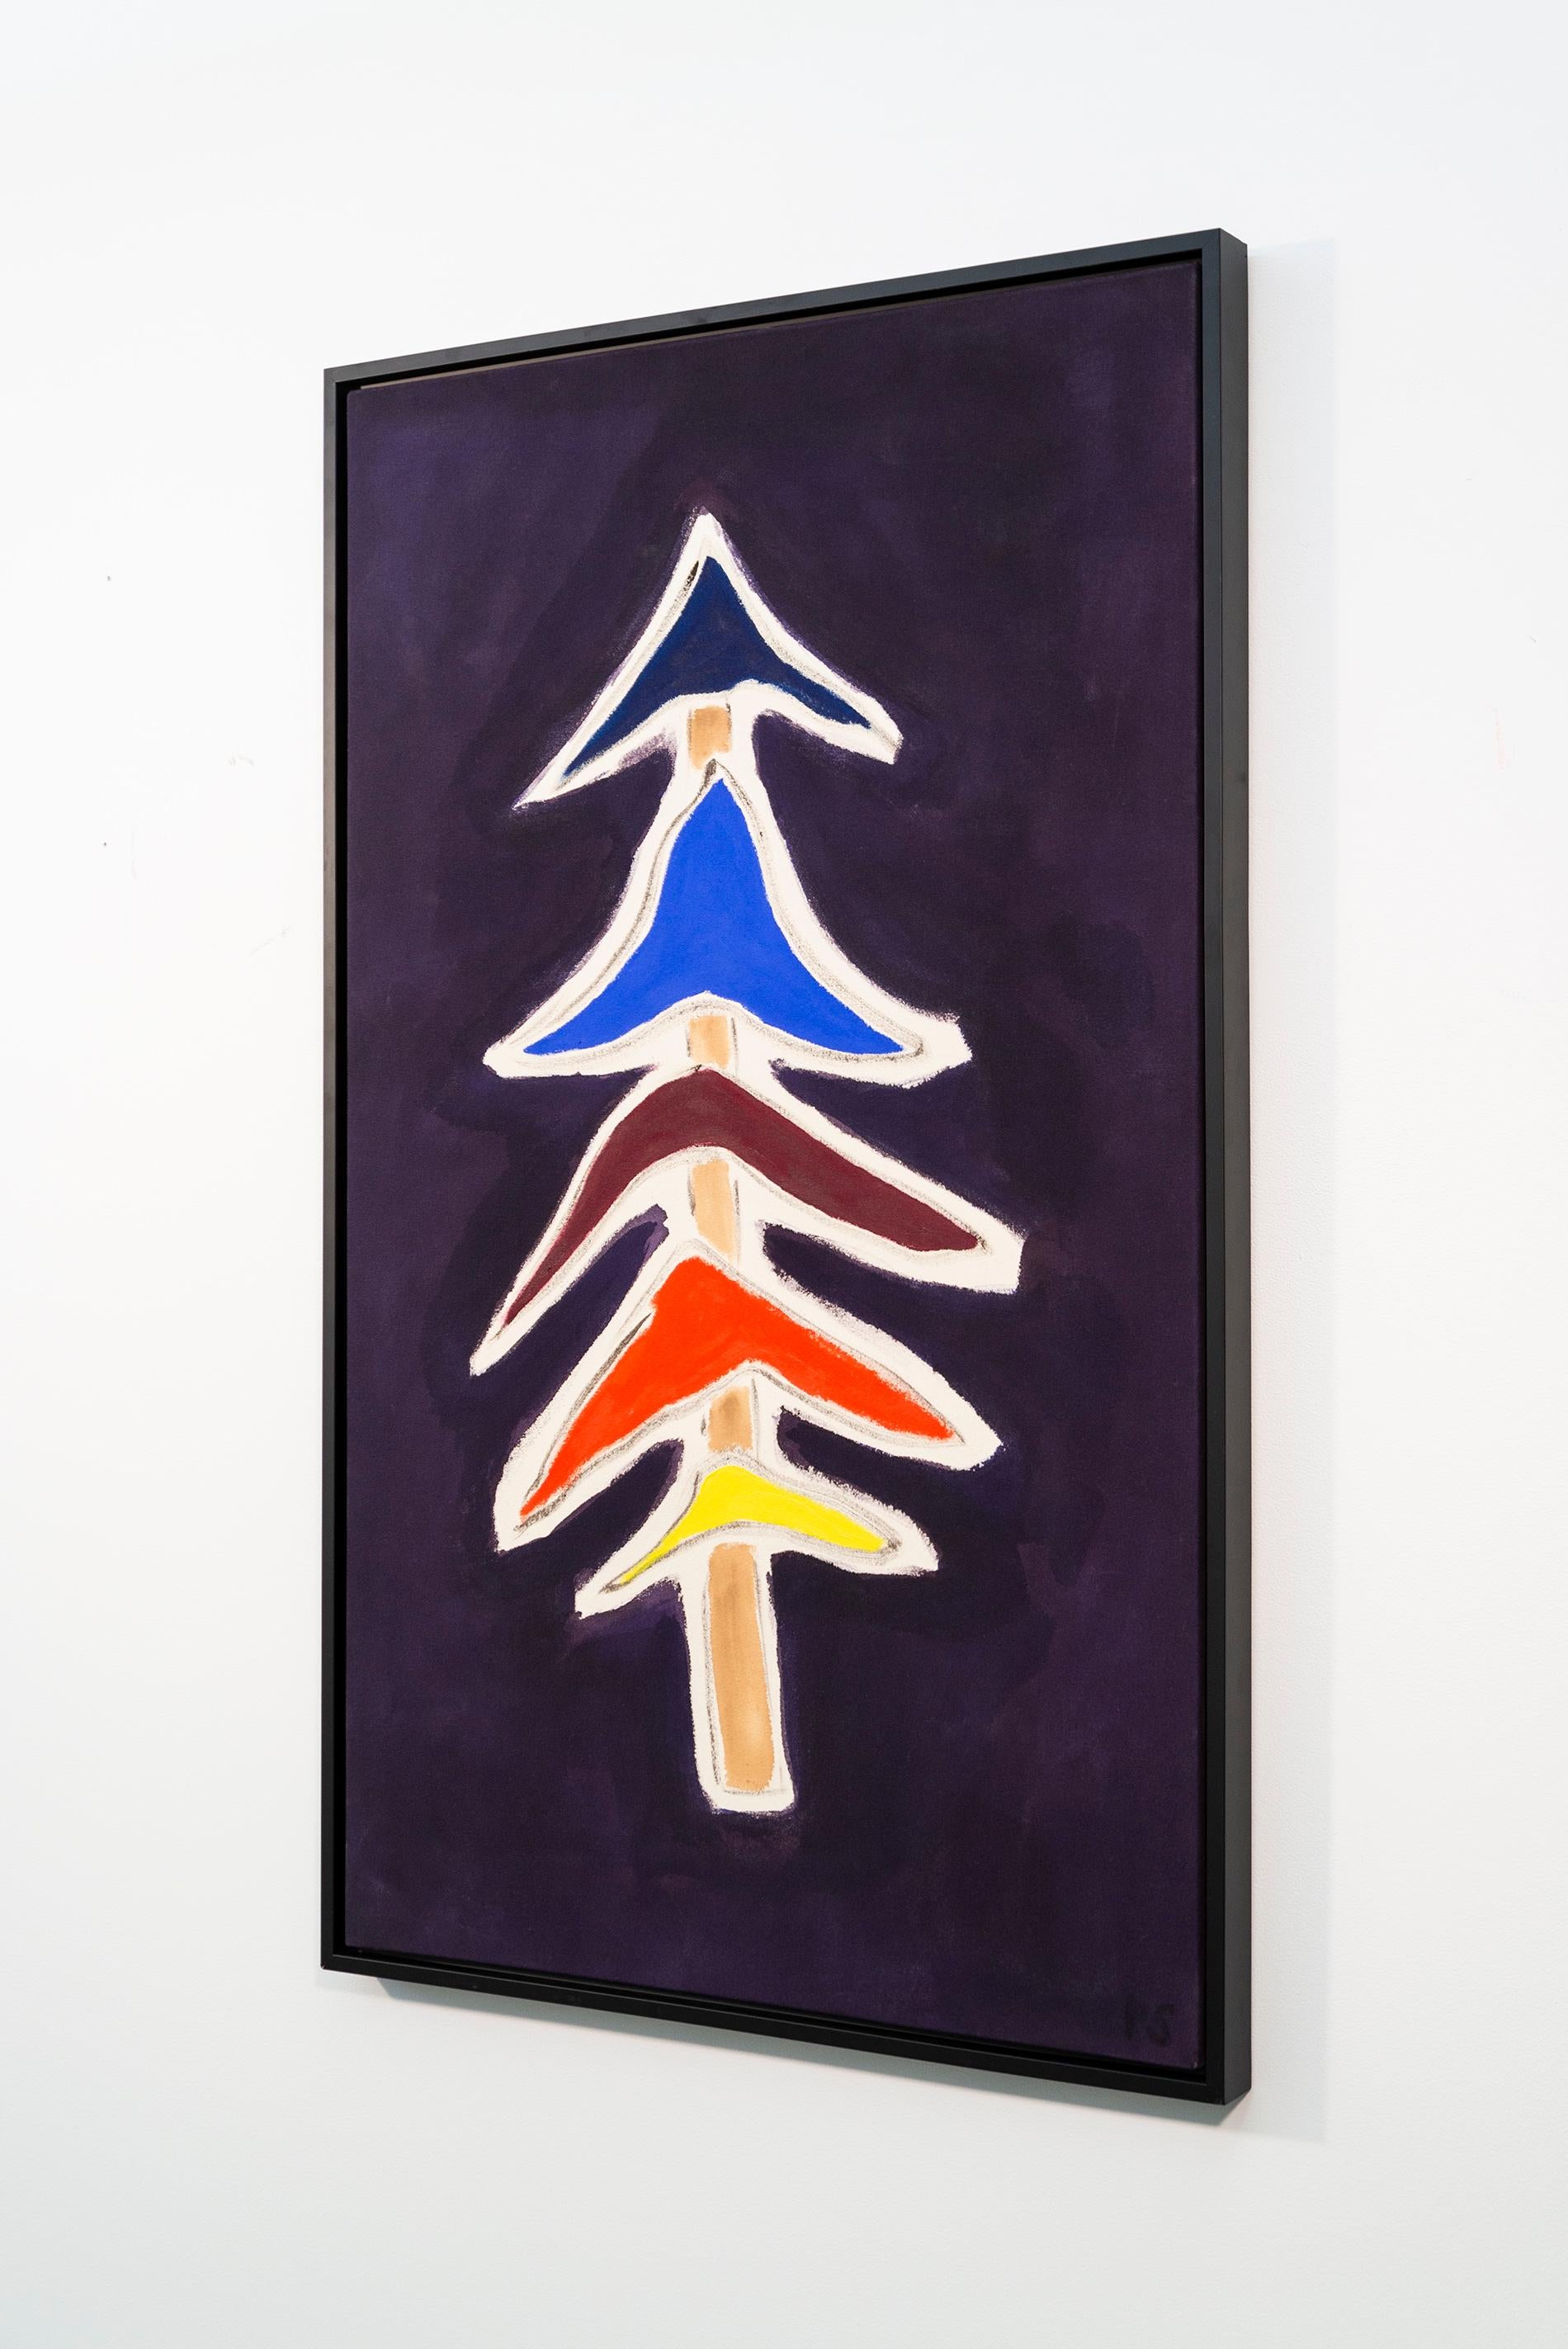 Top Hat - colorful, minimalist, abstracted tree, acrylic on canvas - Painting by Pat Service